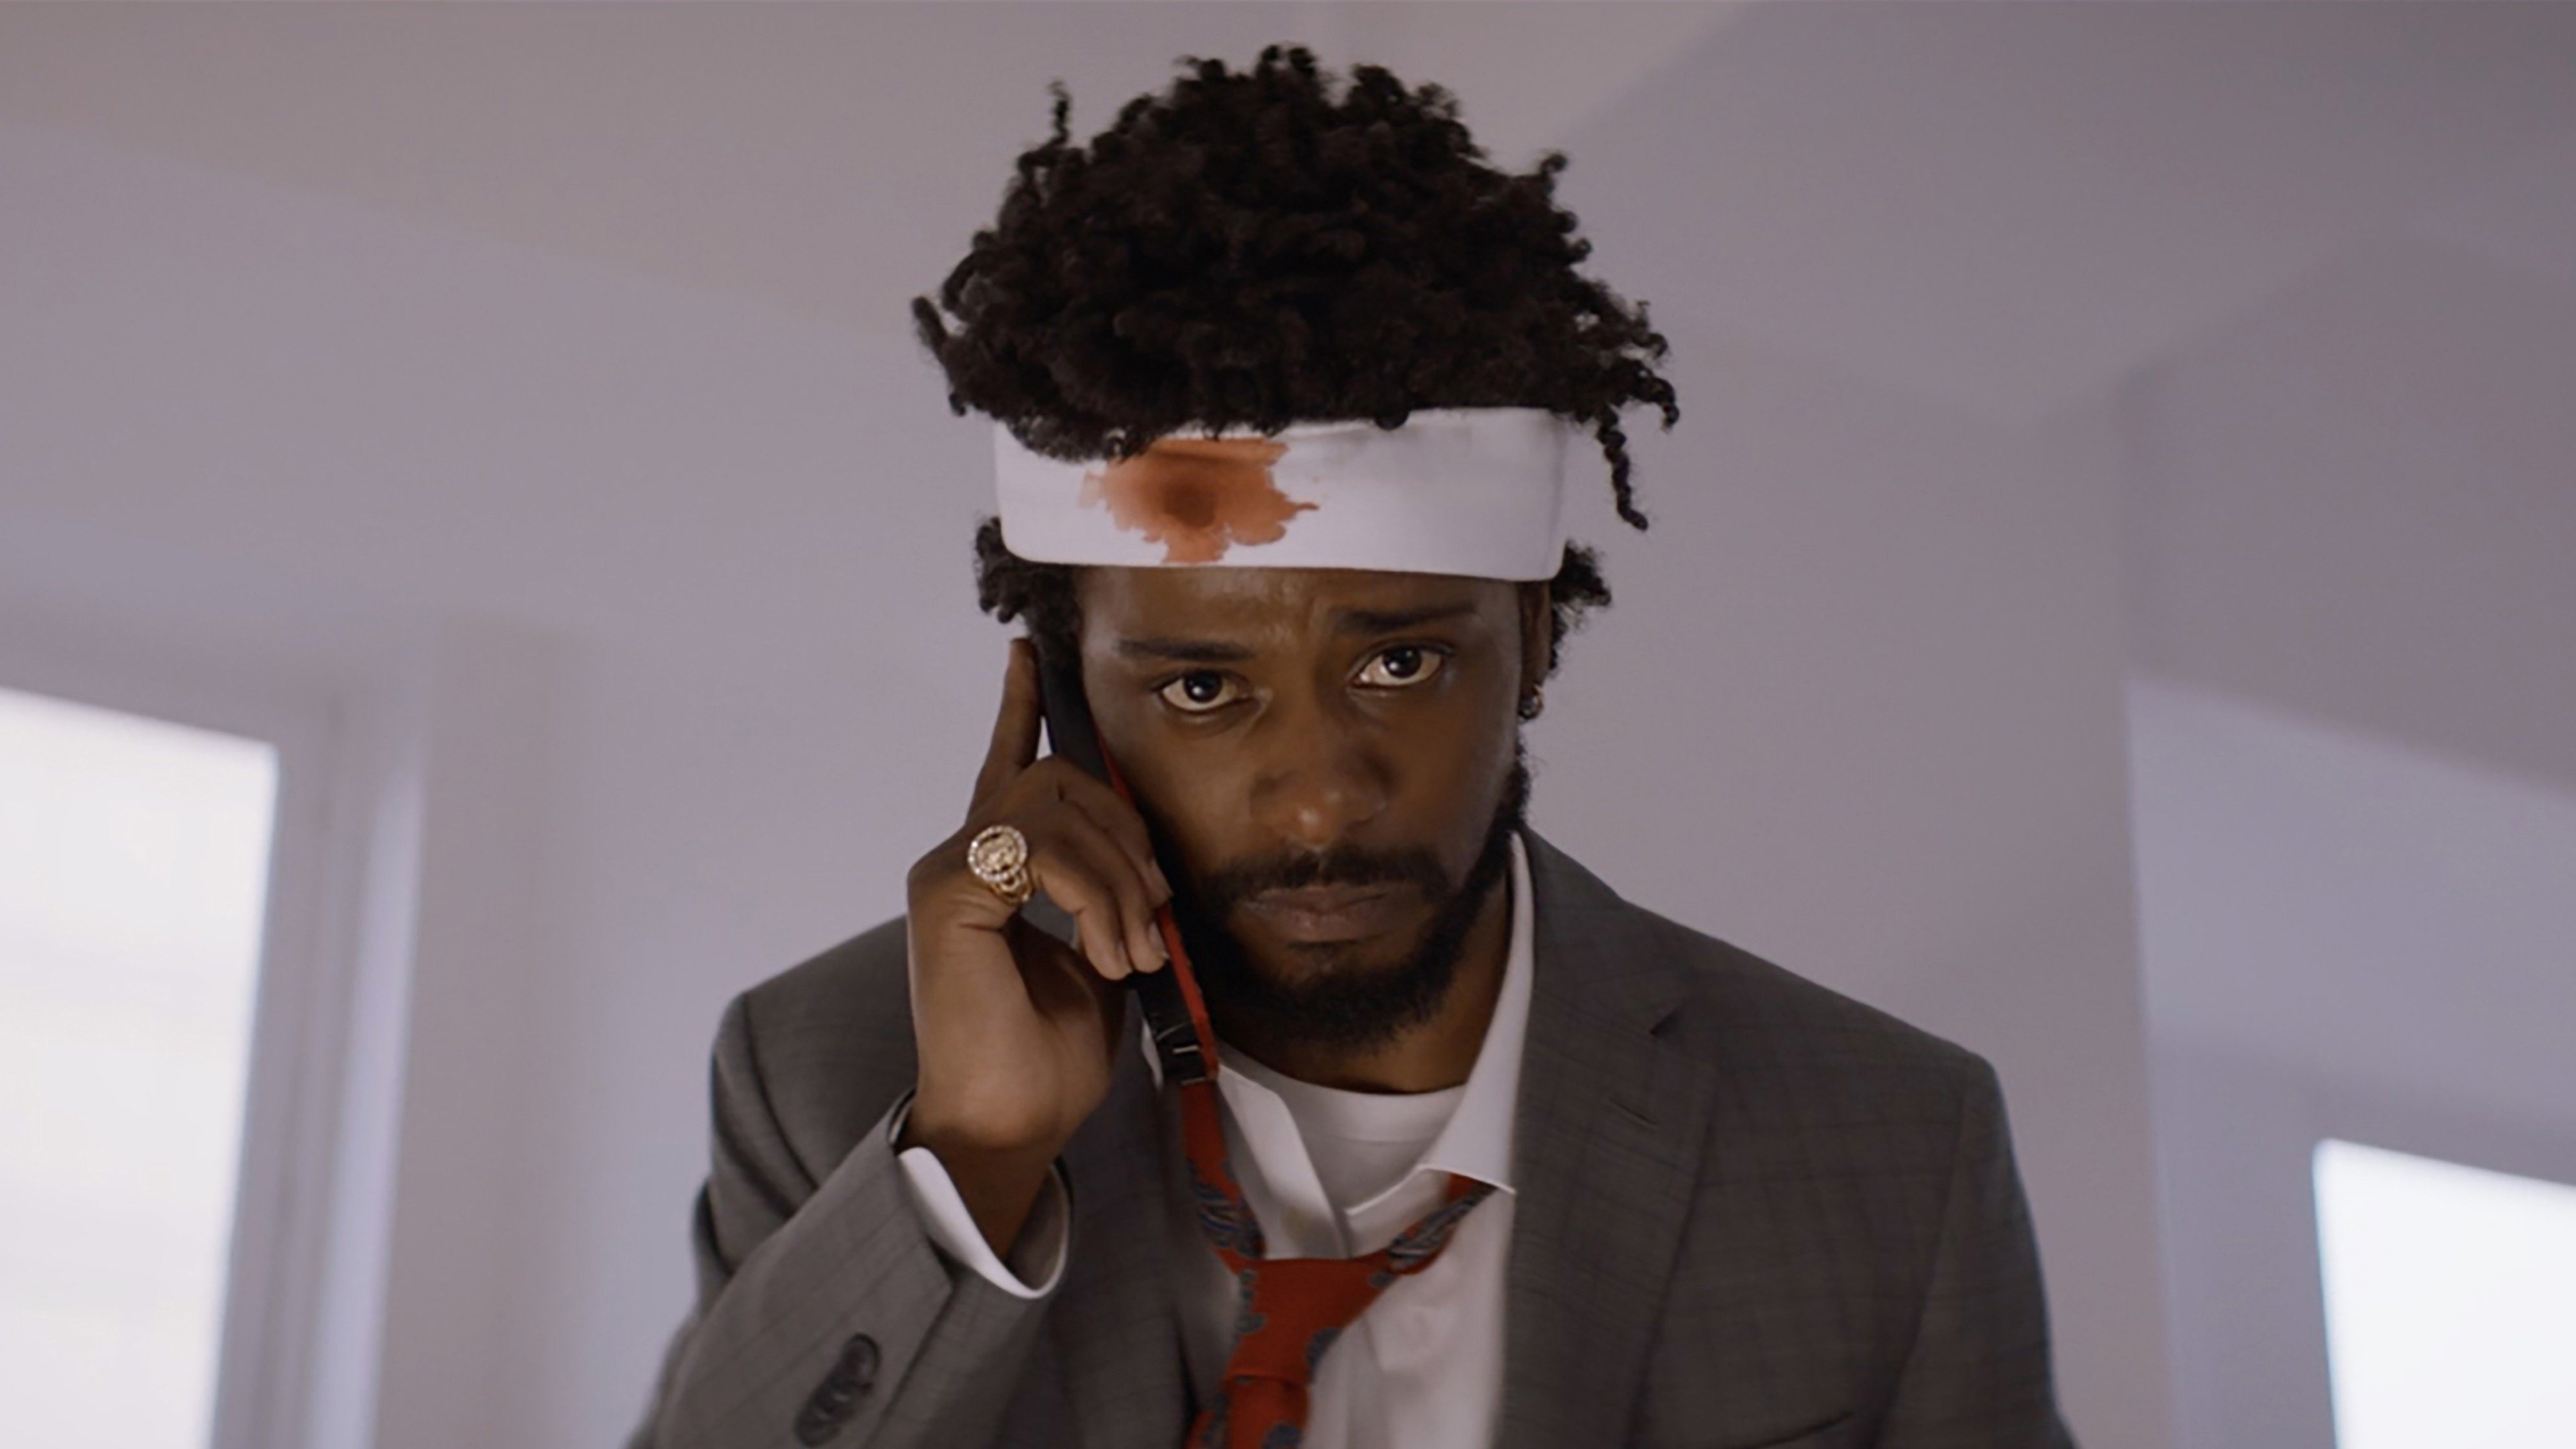 Full movie online, Sorry to Bother You, Free streaming, Entertaining plex experience, 3840x2160 4K Desktop